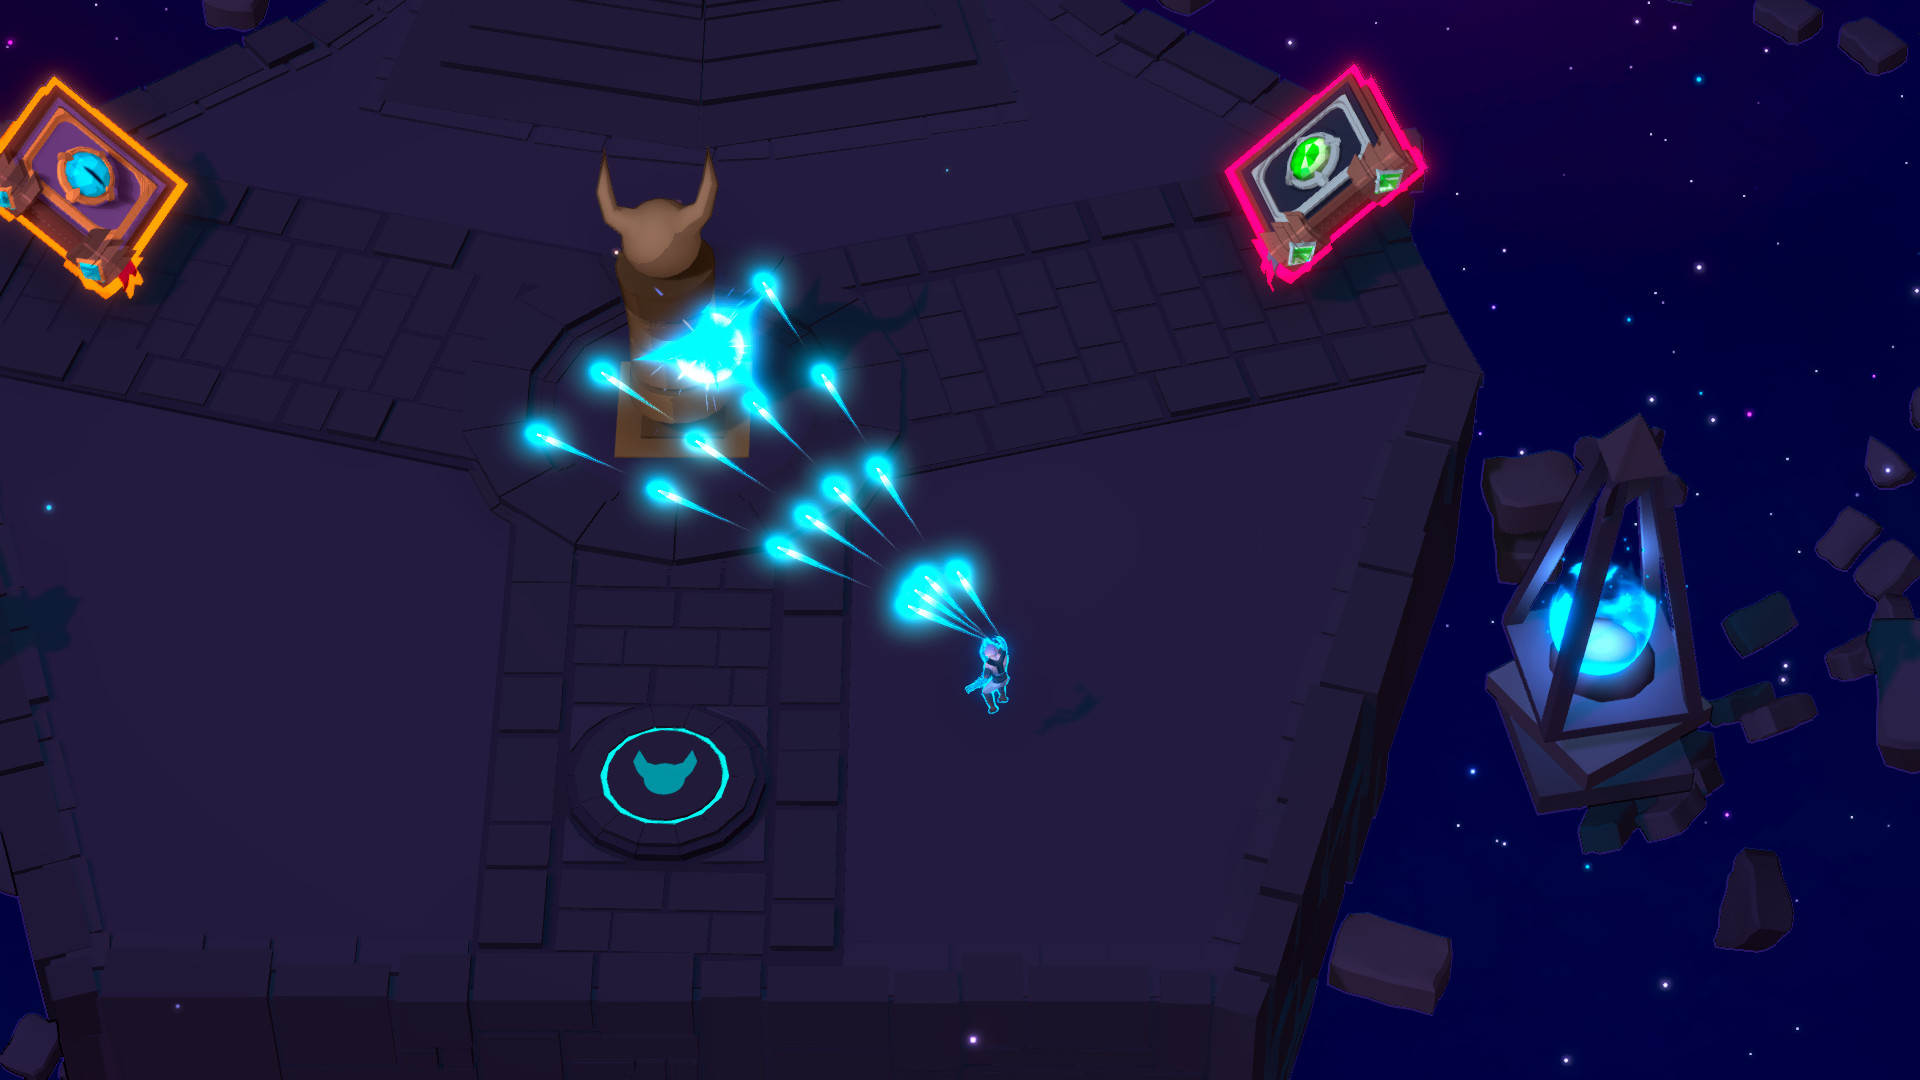 STICK FIGHT: THE GAME MOBILE Brings STICK FIGHT to Mobile Devices for  On-the-Go Fun — GeekTyrant